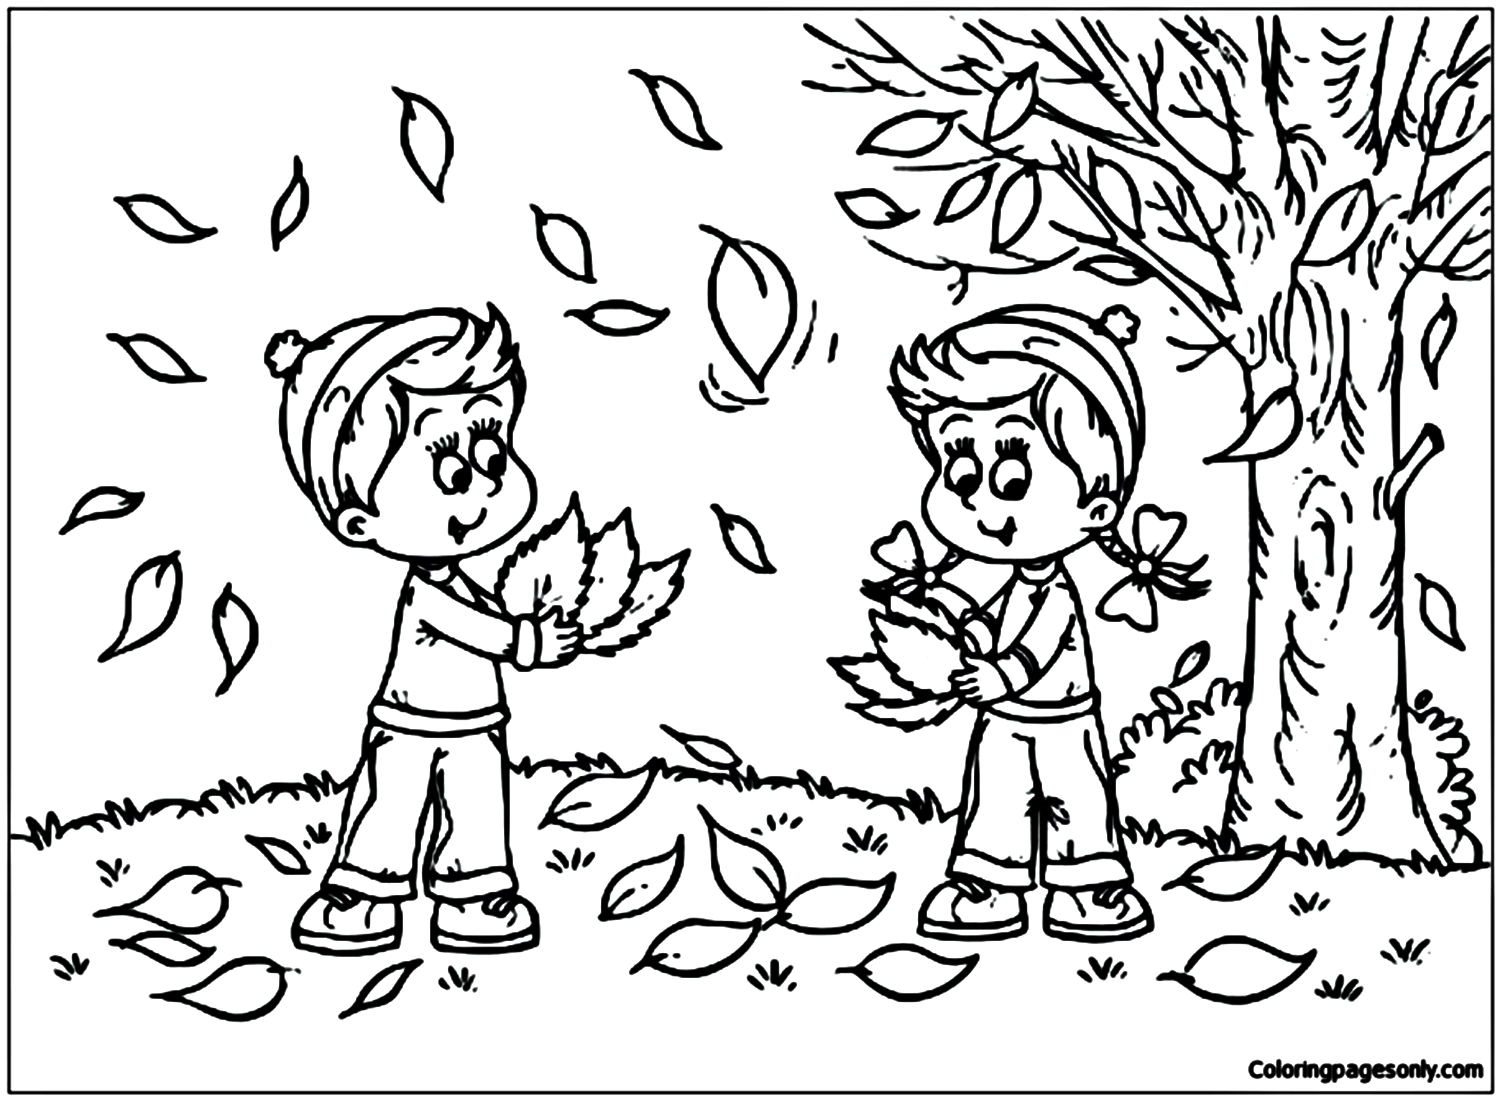 Kids Playing With Fall Leaves from Fall